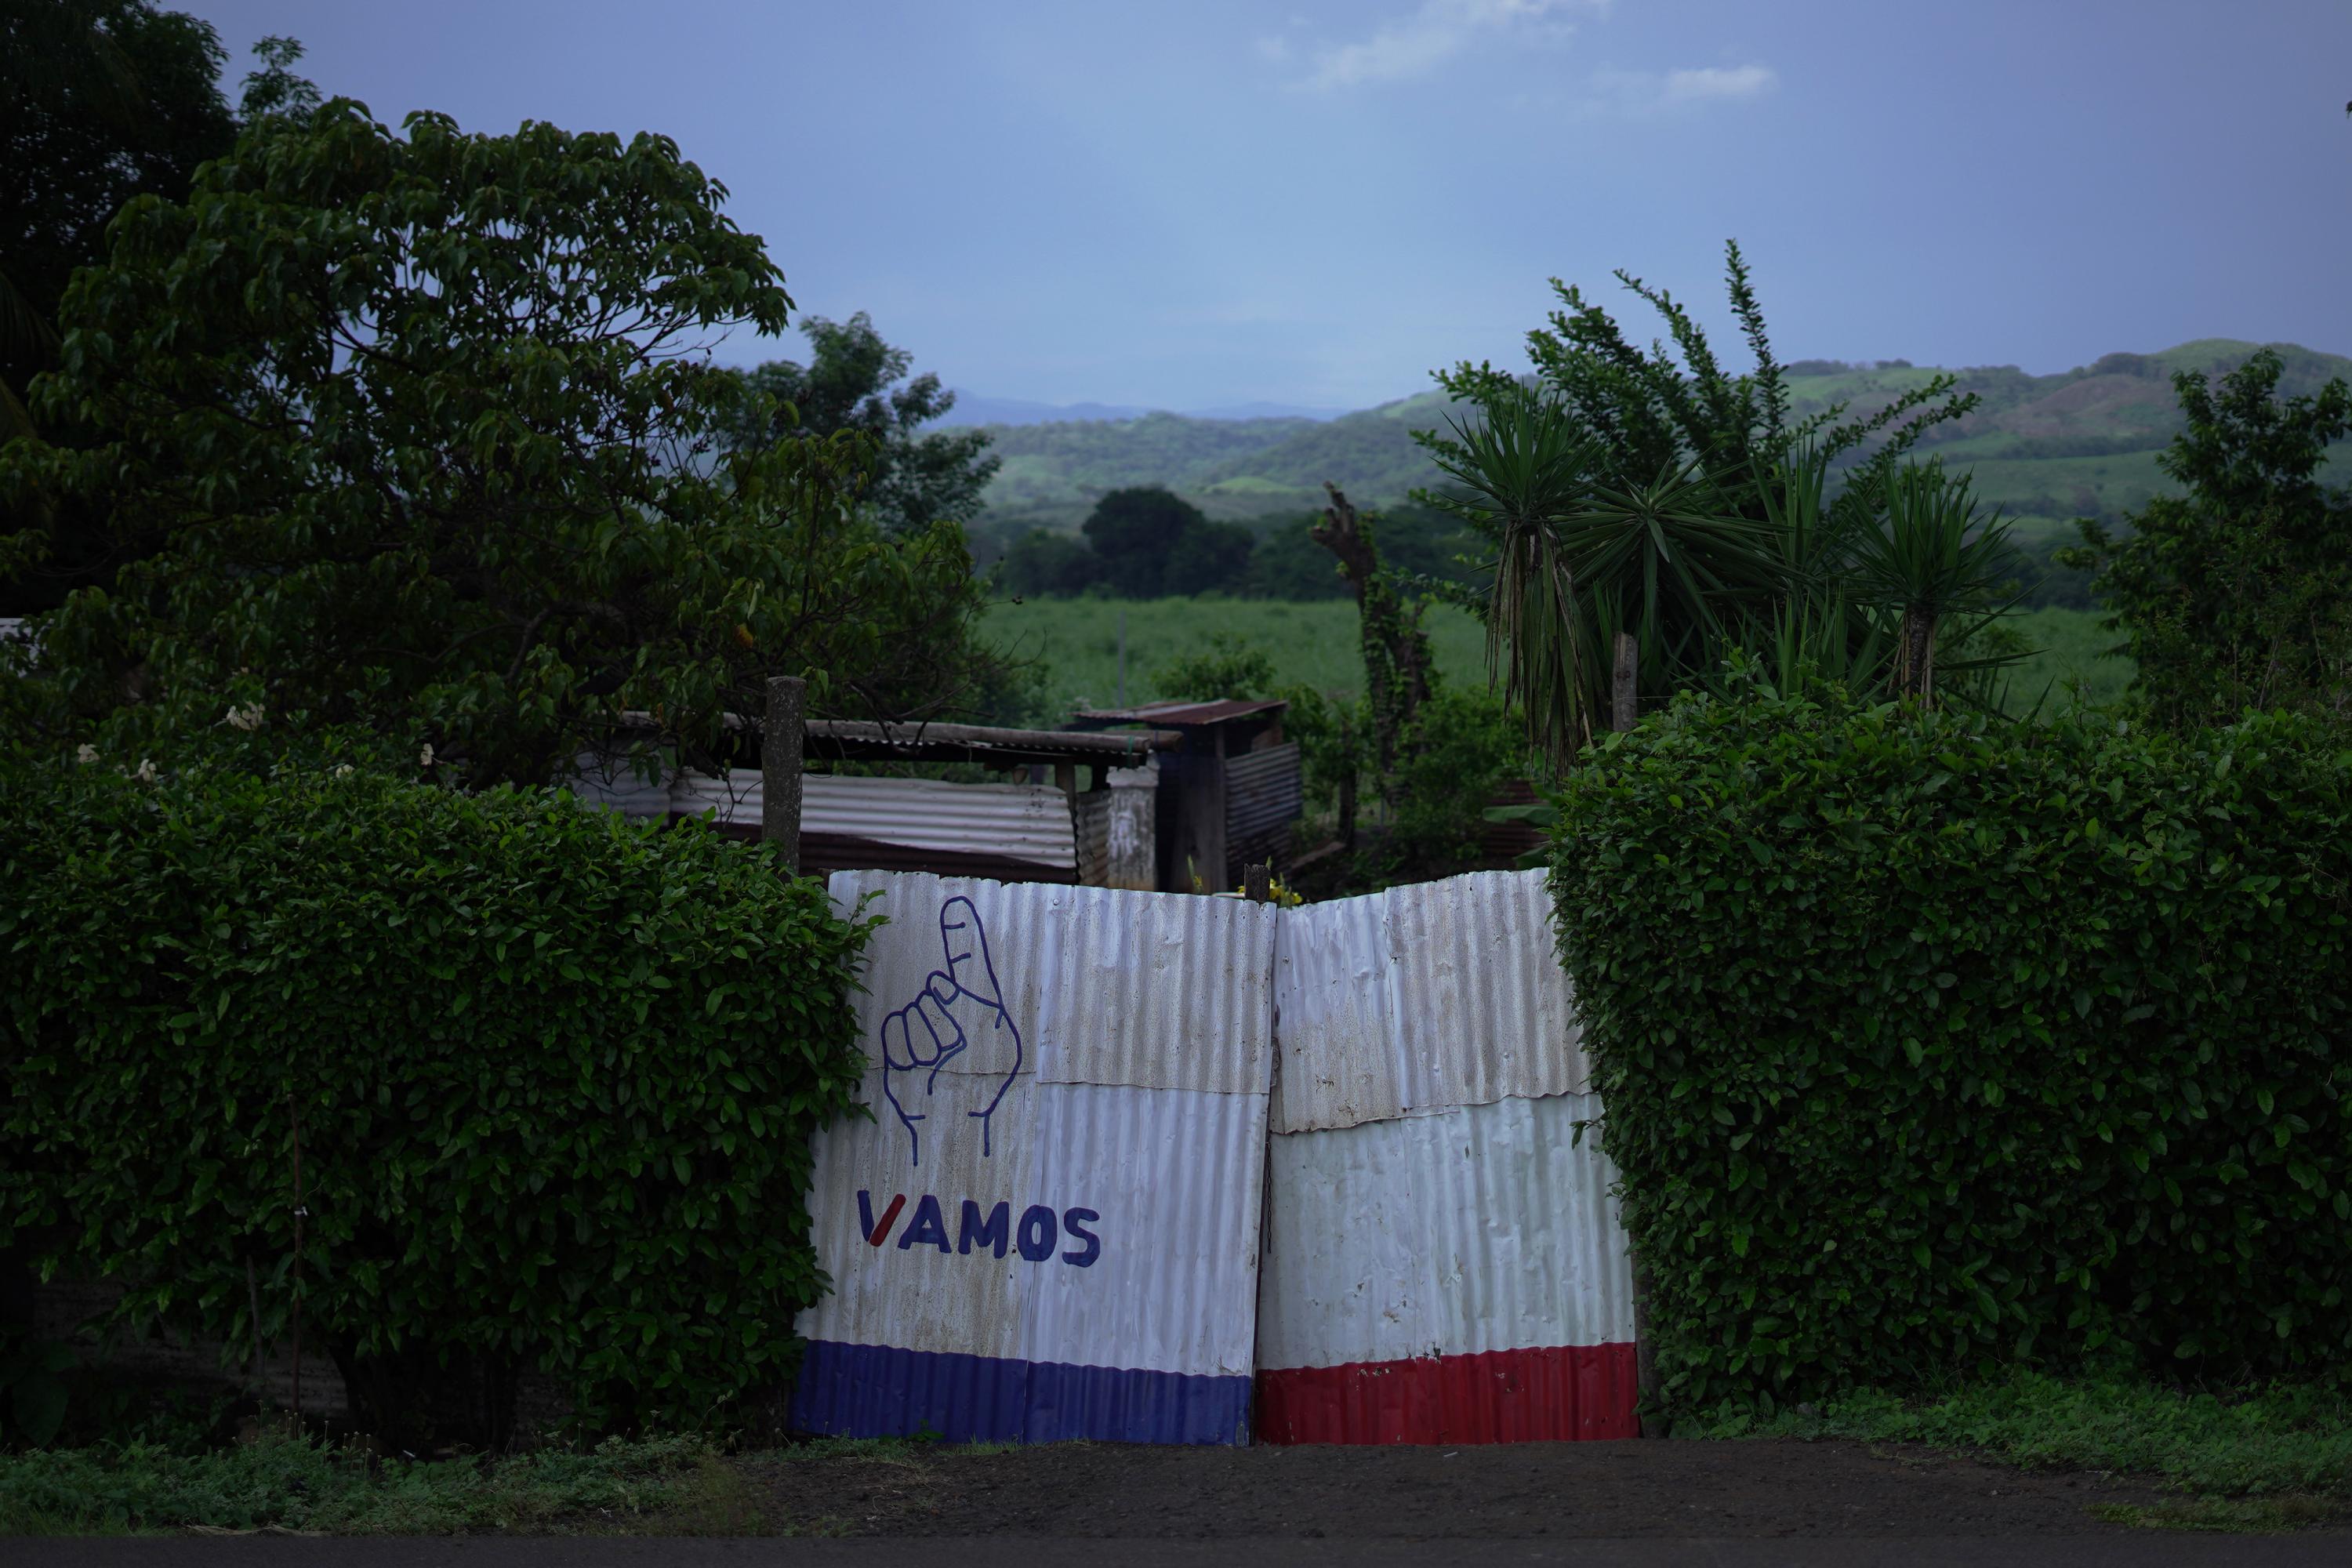 In the run-up to the 2023 national elections in Guatemala, ampaign ads for the ruling party Vamos coat the gate to a home in the village of Cinco Palos, Gunagazapa, in the department of Escuintla.